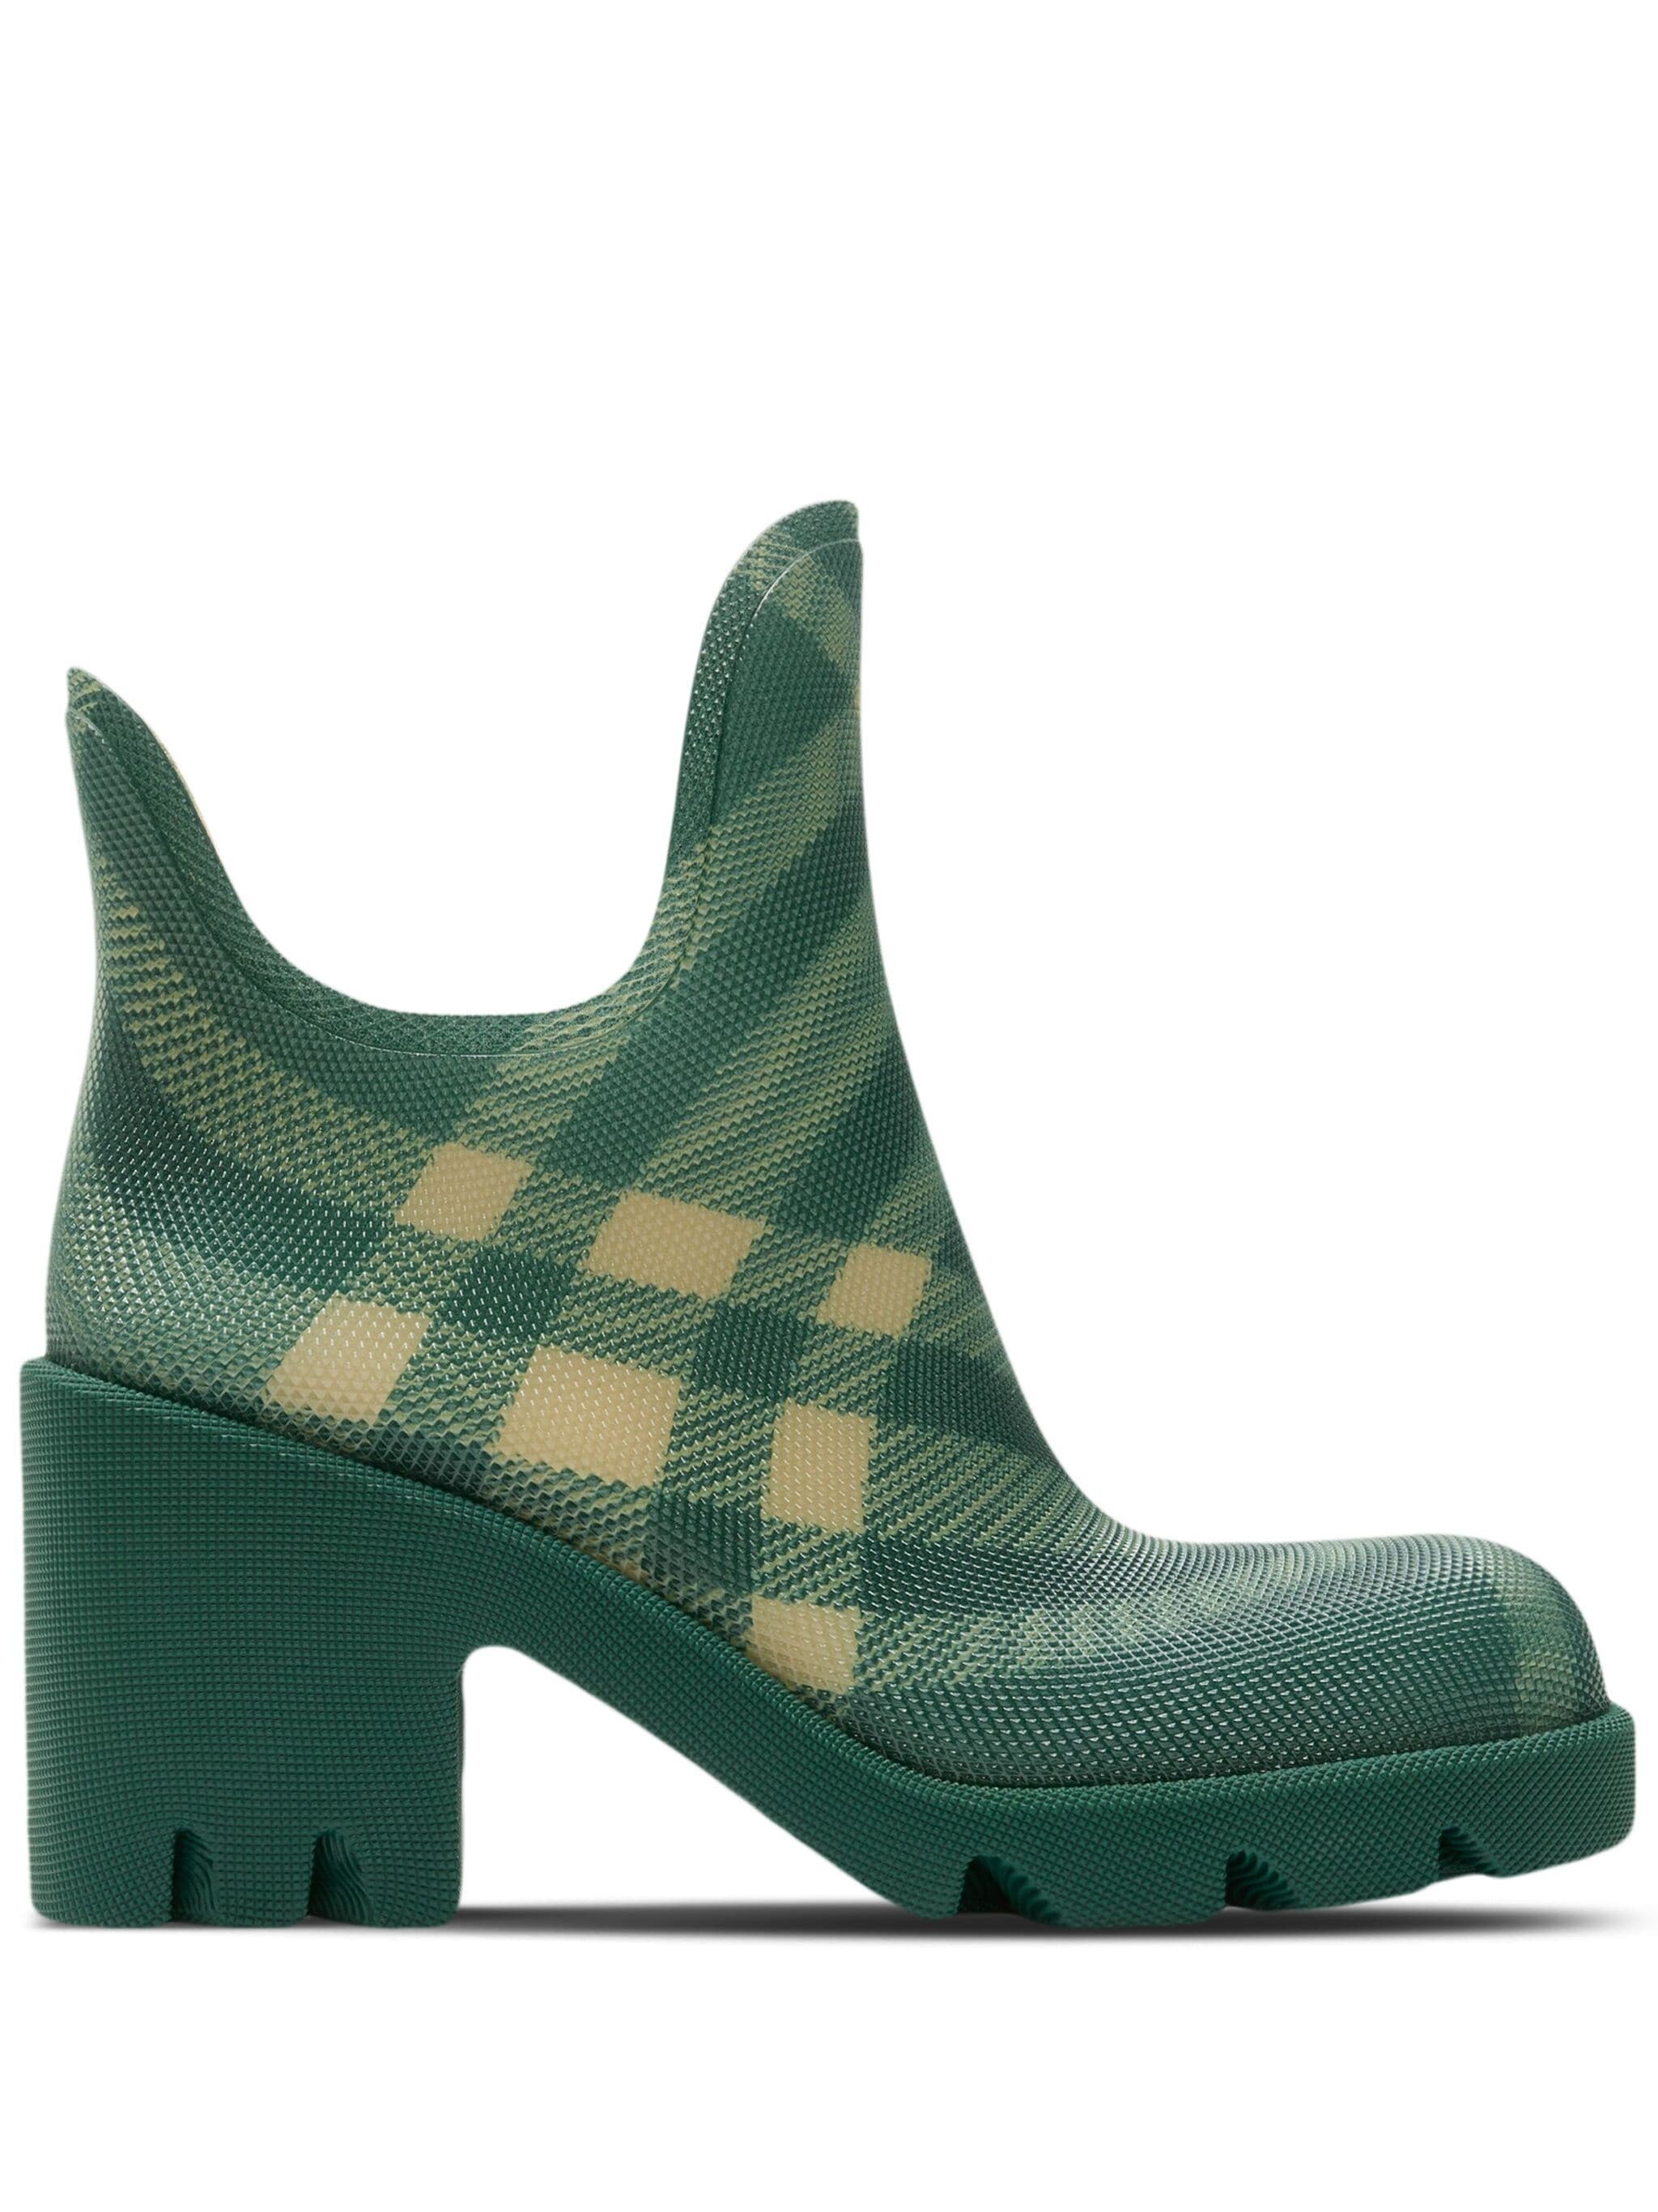 Marsh checked rubber boots